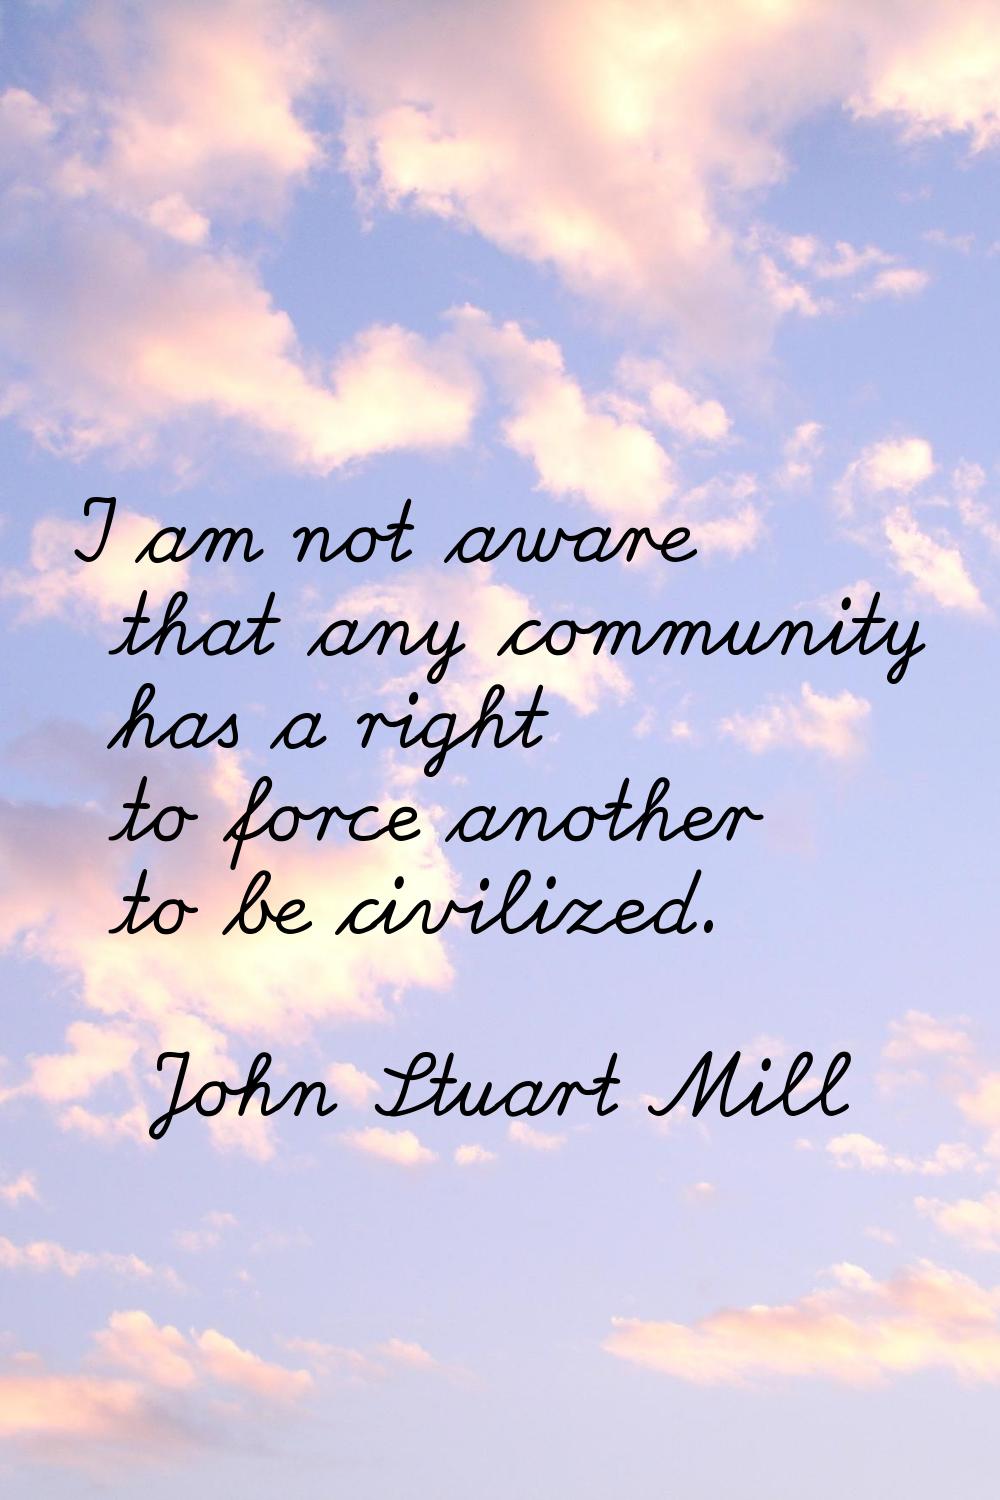 I am not aware that any community has a right to force another to be civilized.